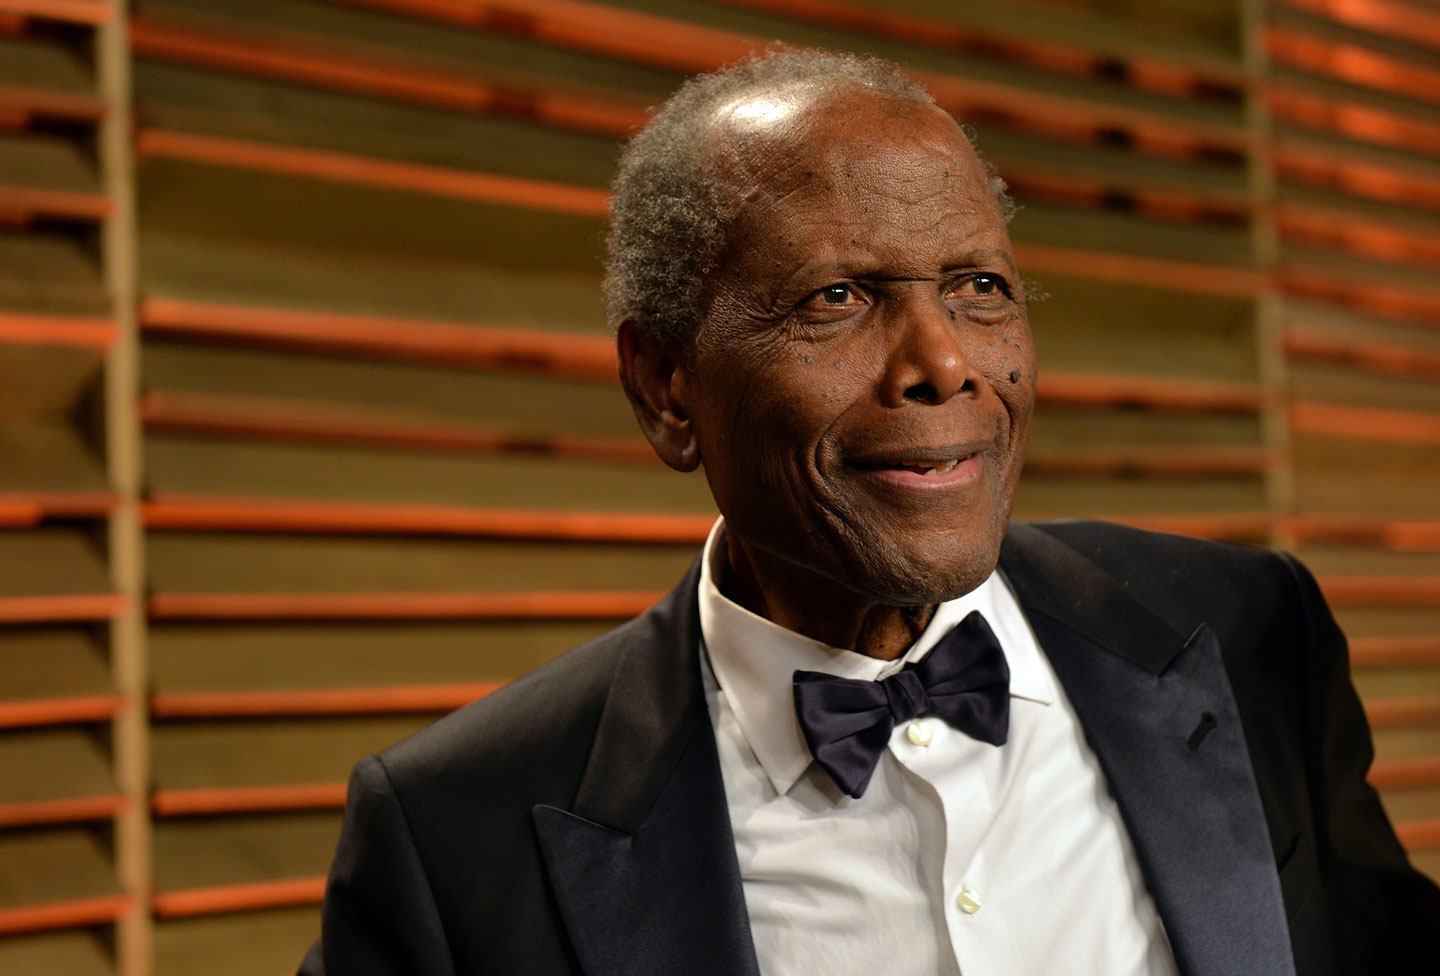 Sidney Poitier attends a Vanity Fair Oscar Party, 2014. (Larry Busacca — Getty Images)